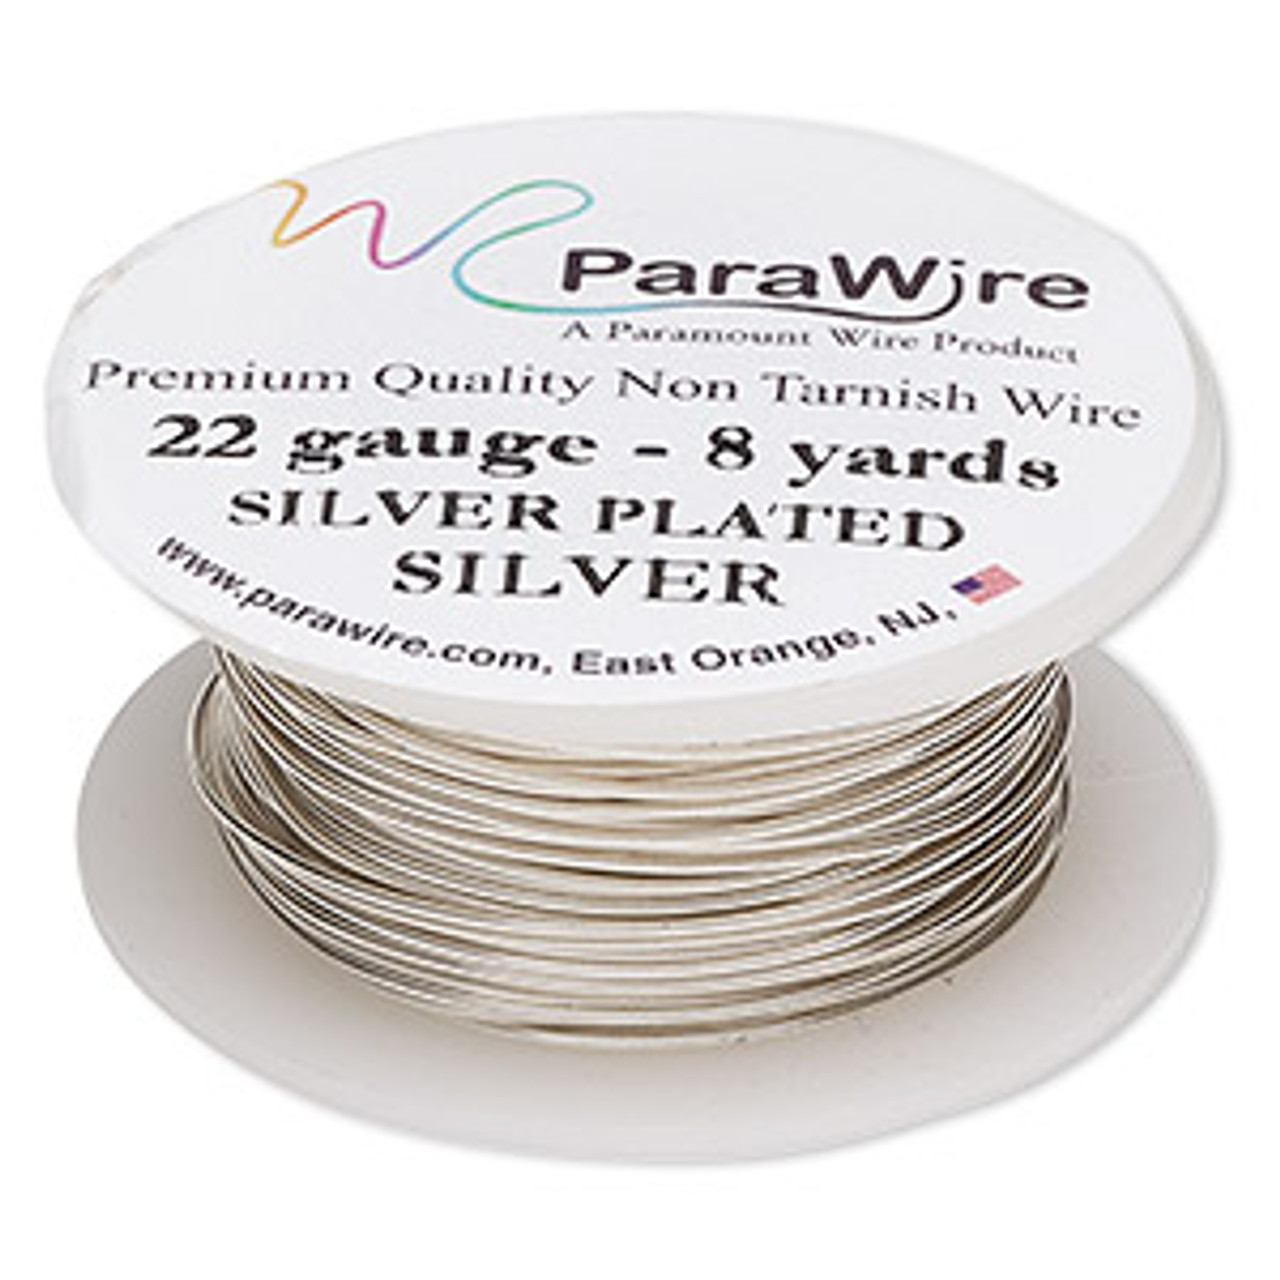 Gold Plated Wire - Parawire